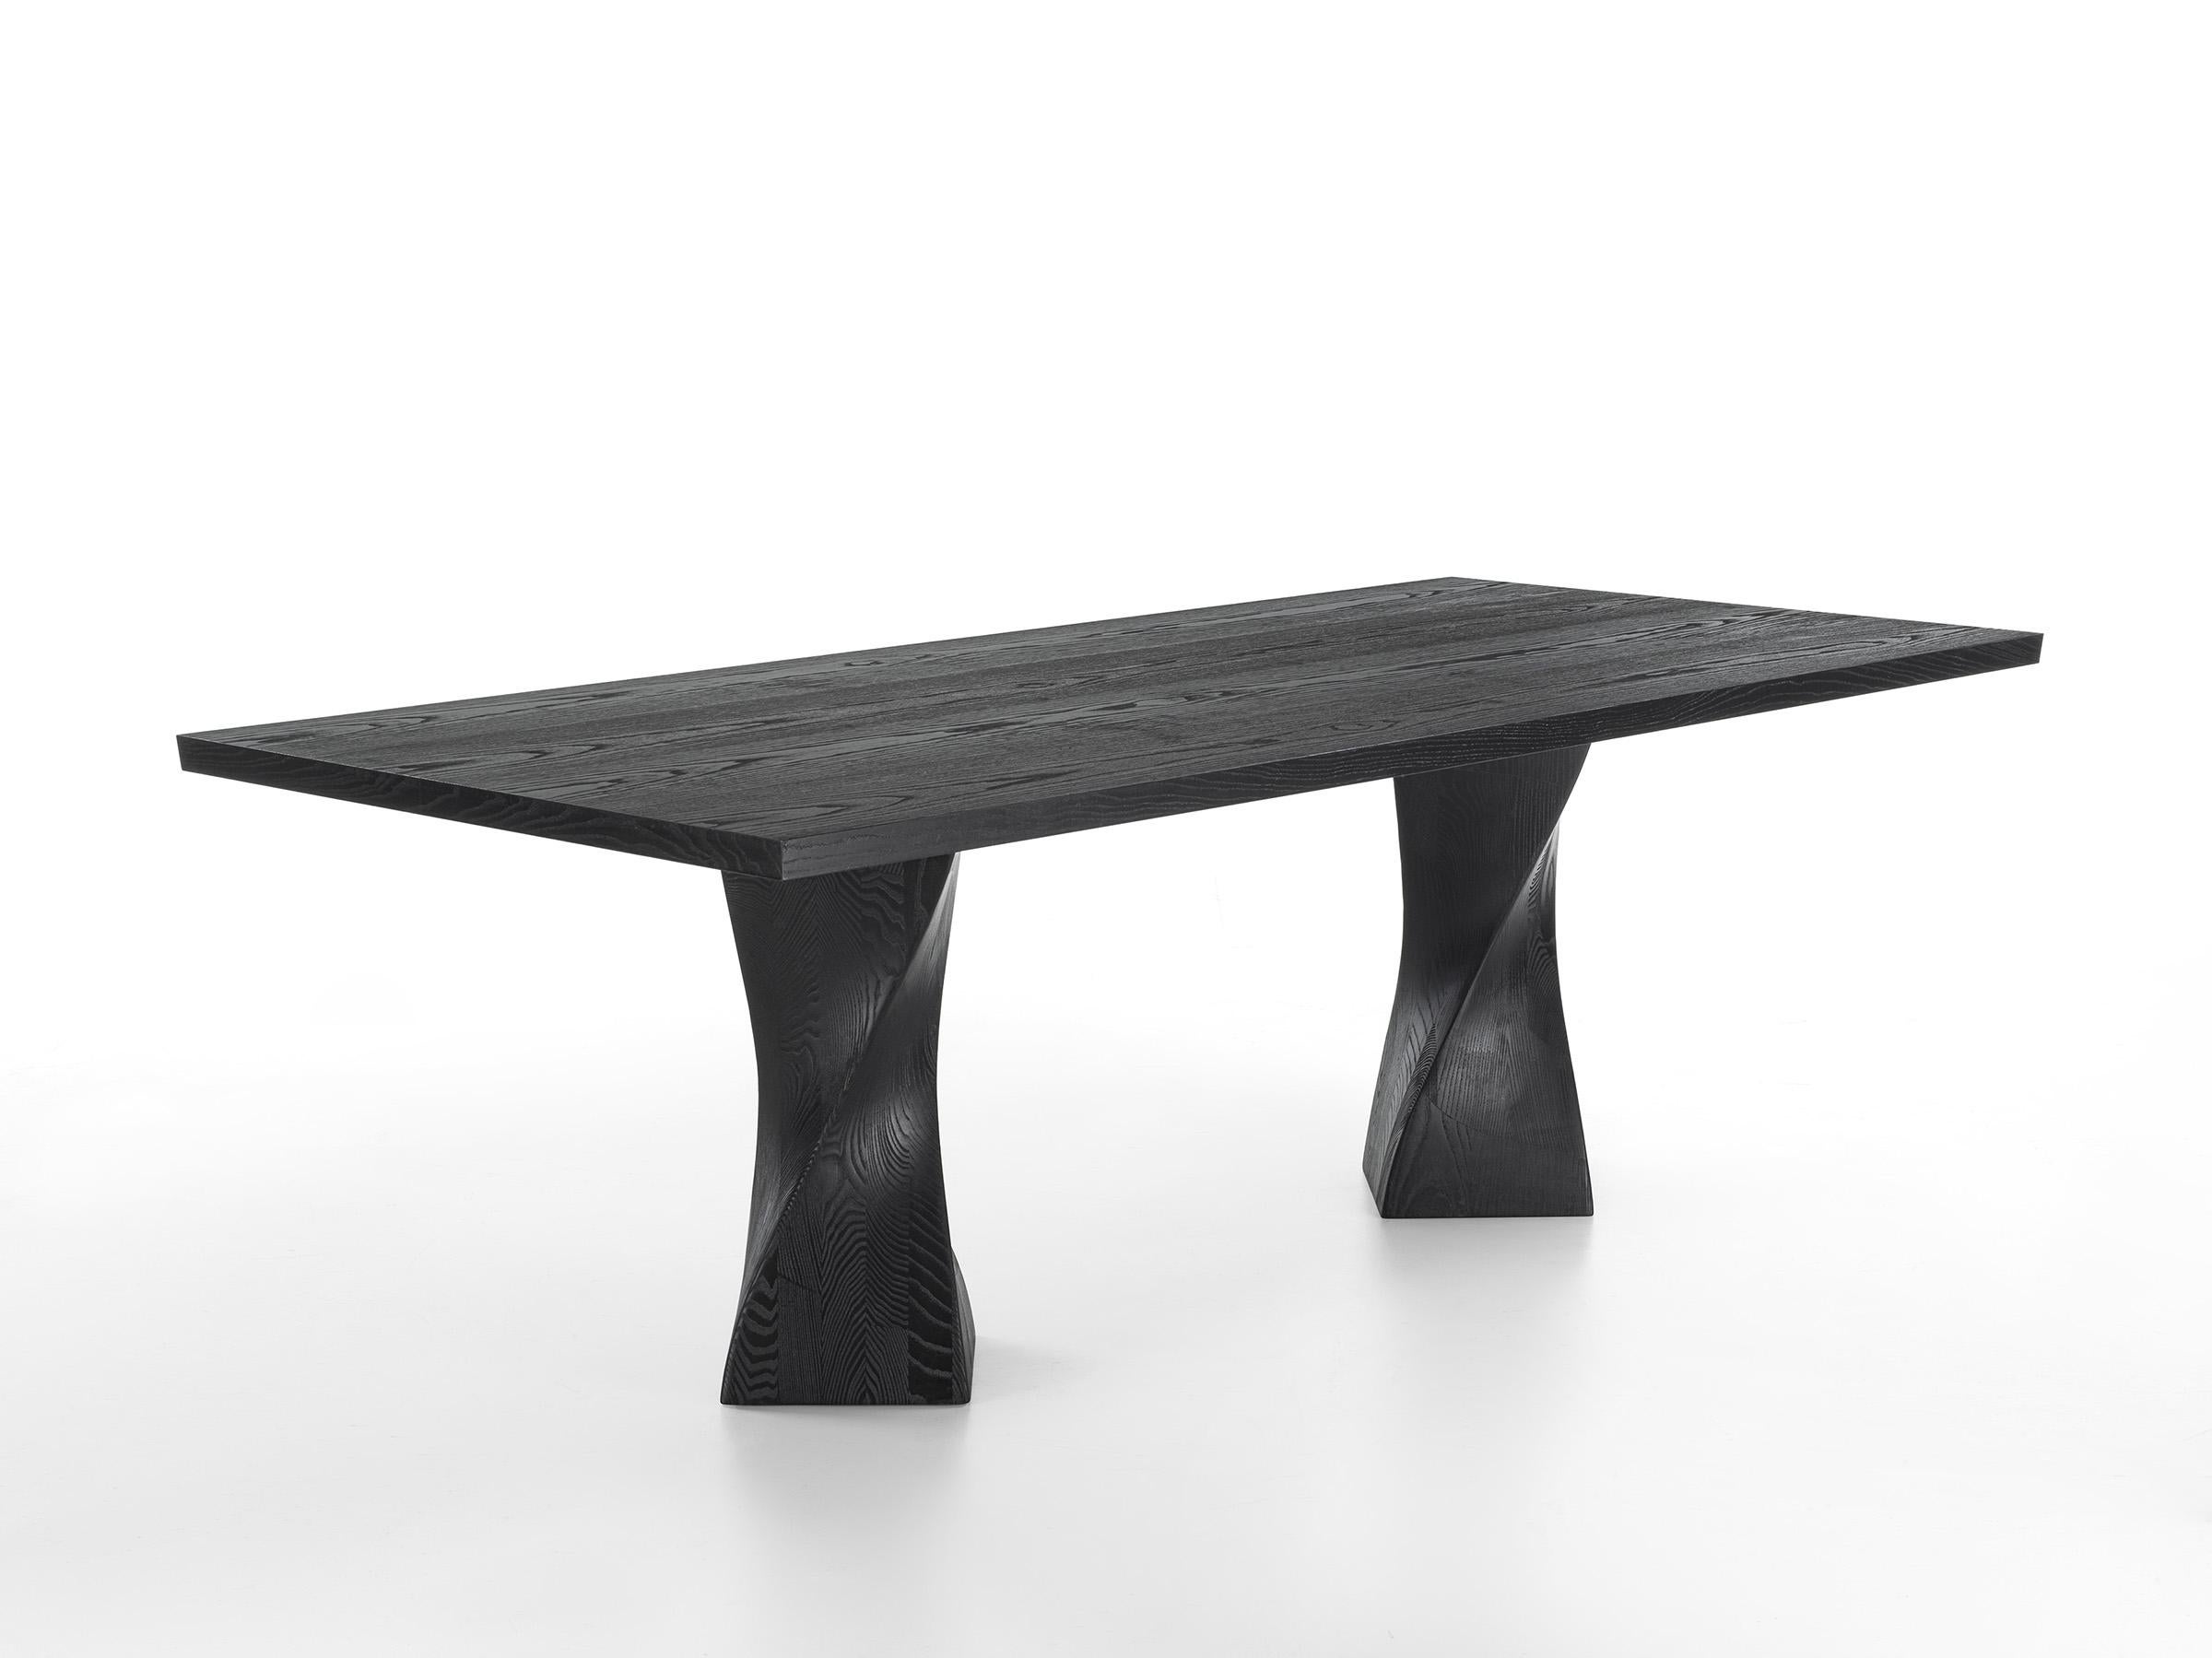 Table with blockboard veneered top and bevelled edges. It is characterized by two solid wood legs in pigmented finish. The processing gives it movement and dynamism. Legs in solid ash, pigmented.

Designed by Studio Excalibur and made in